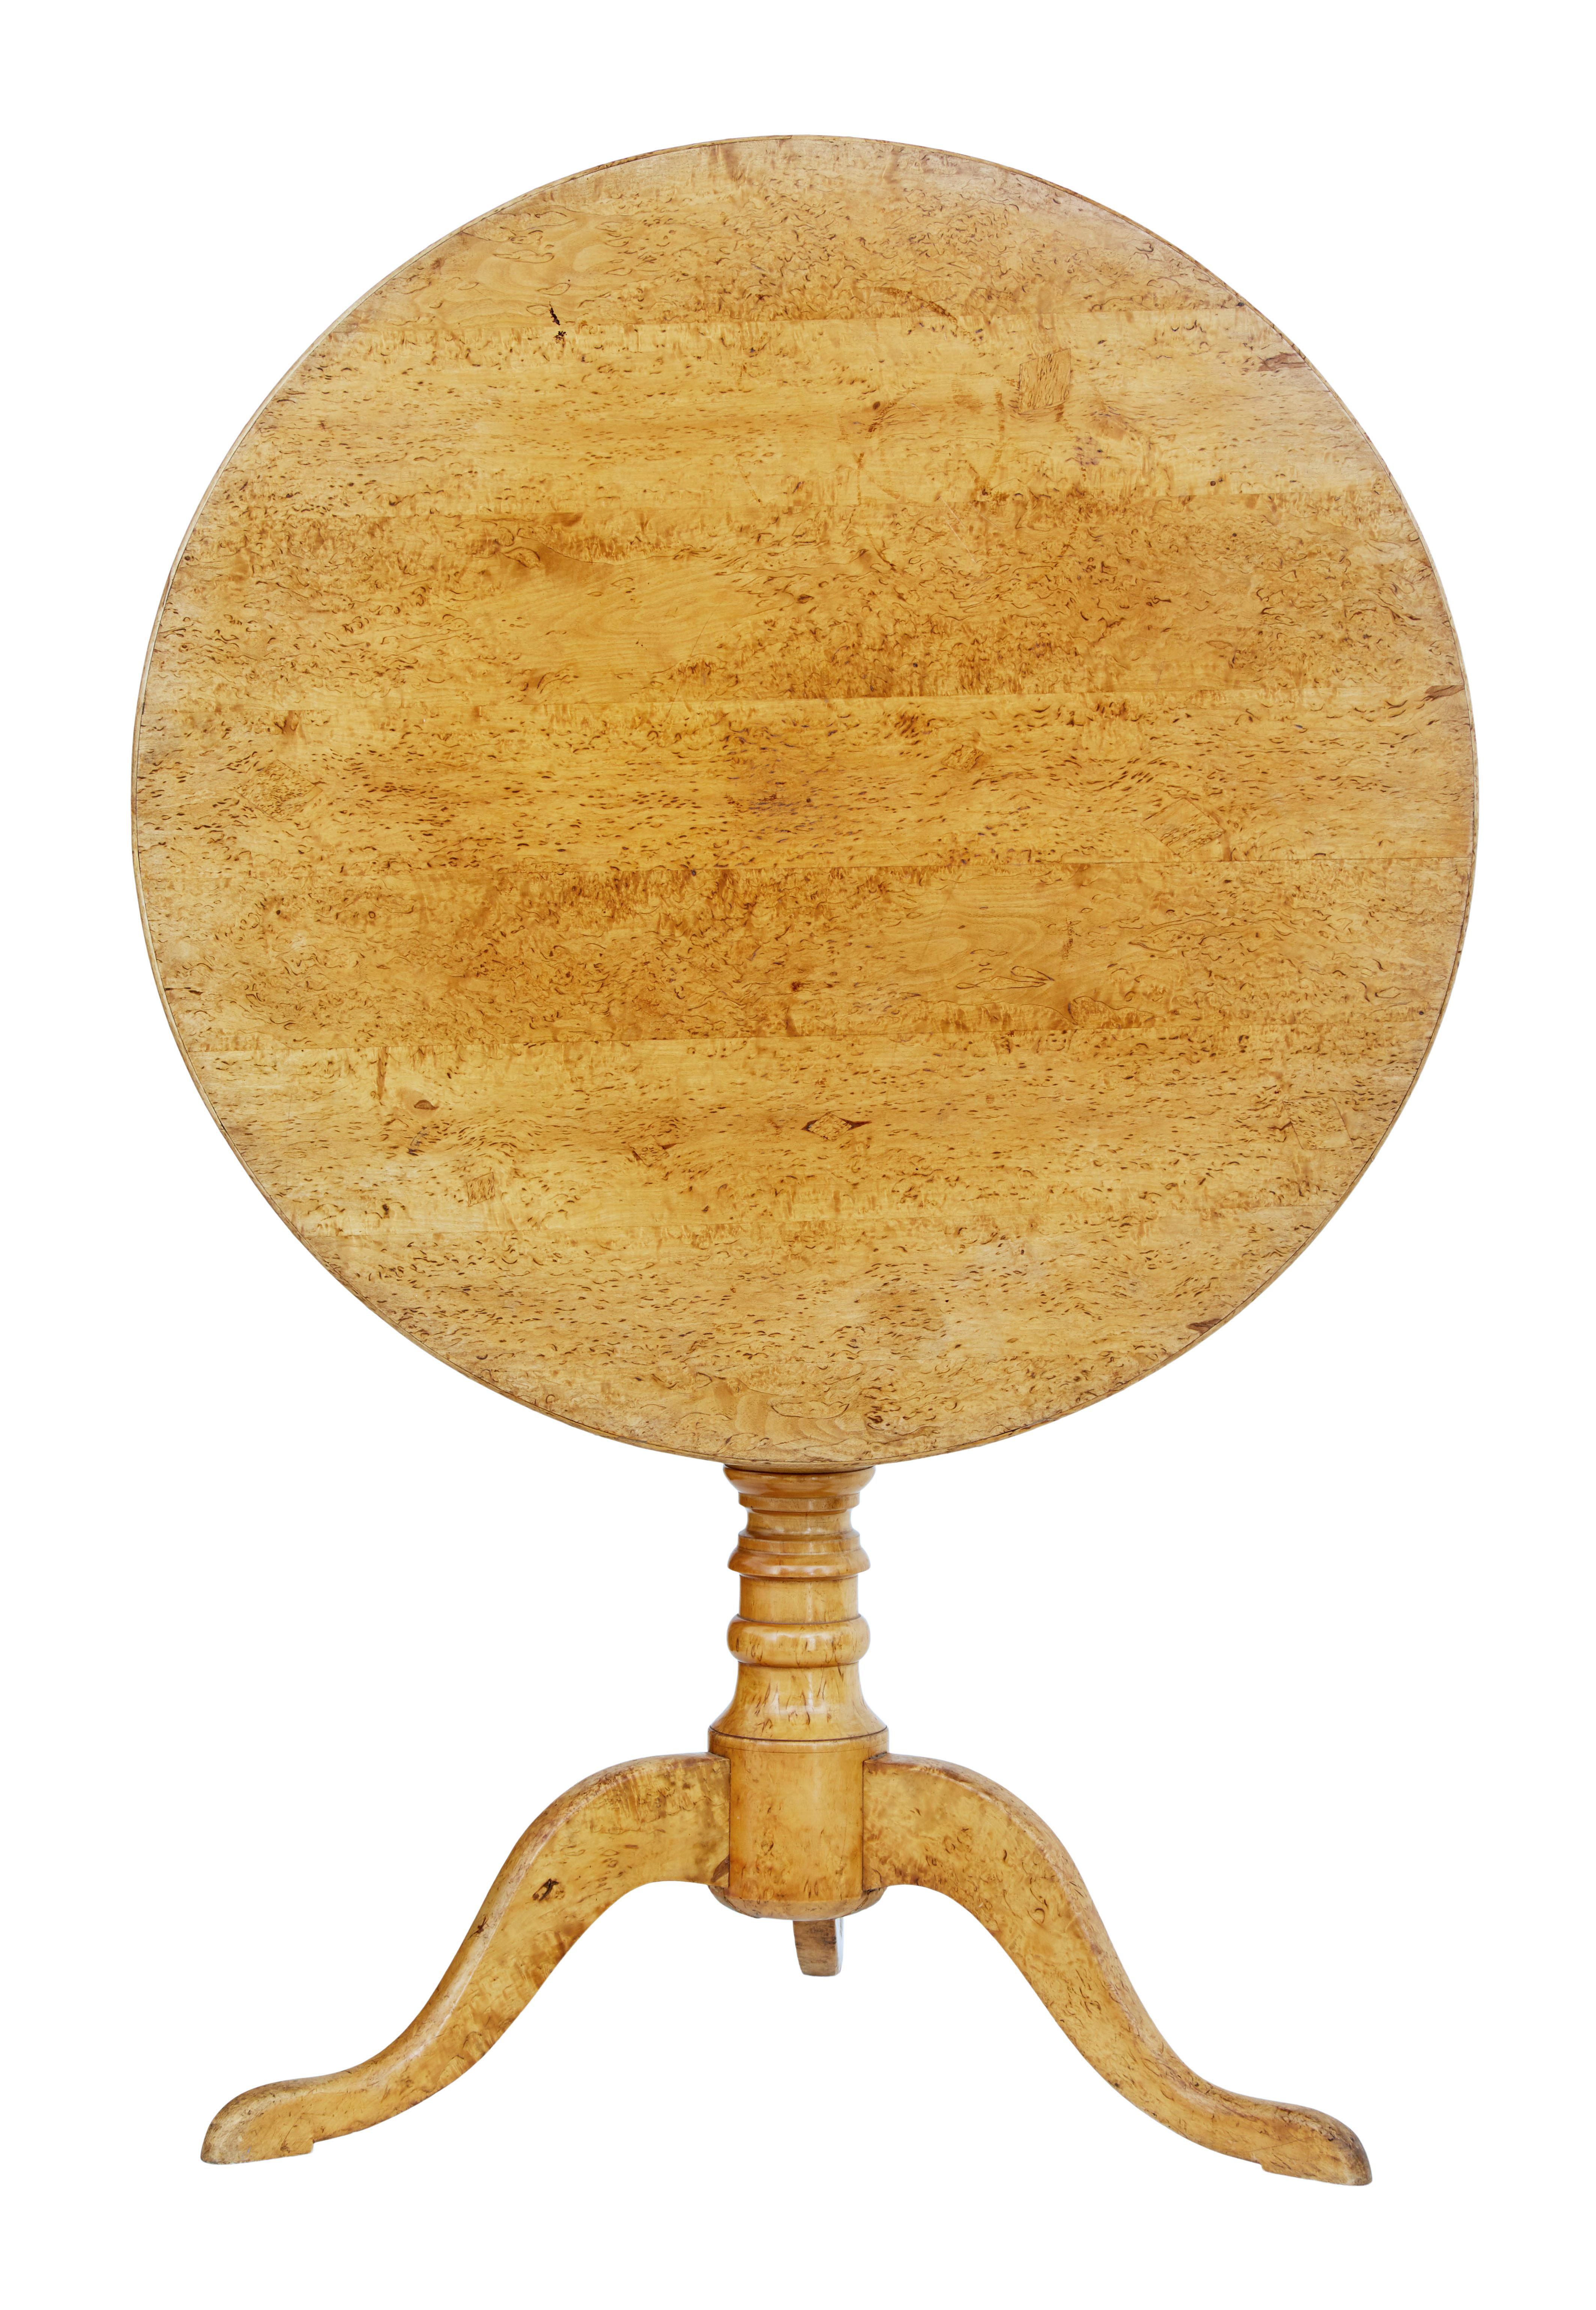 Beautiful round tilt-top table circa 1870.

Stunning burr birch veneered round top, which tilts for easier storage when not in use. Top held in place by wooden peg.

Standing on a solid turned stem and tripod feet of the same burr wood.

Minor